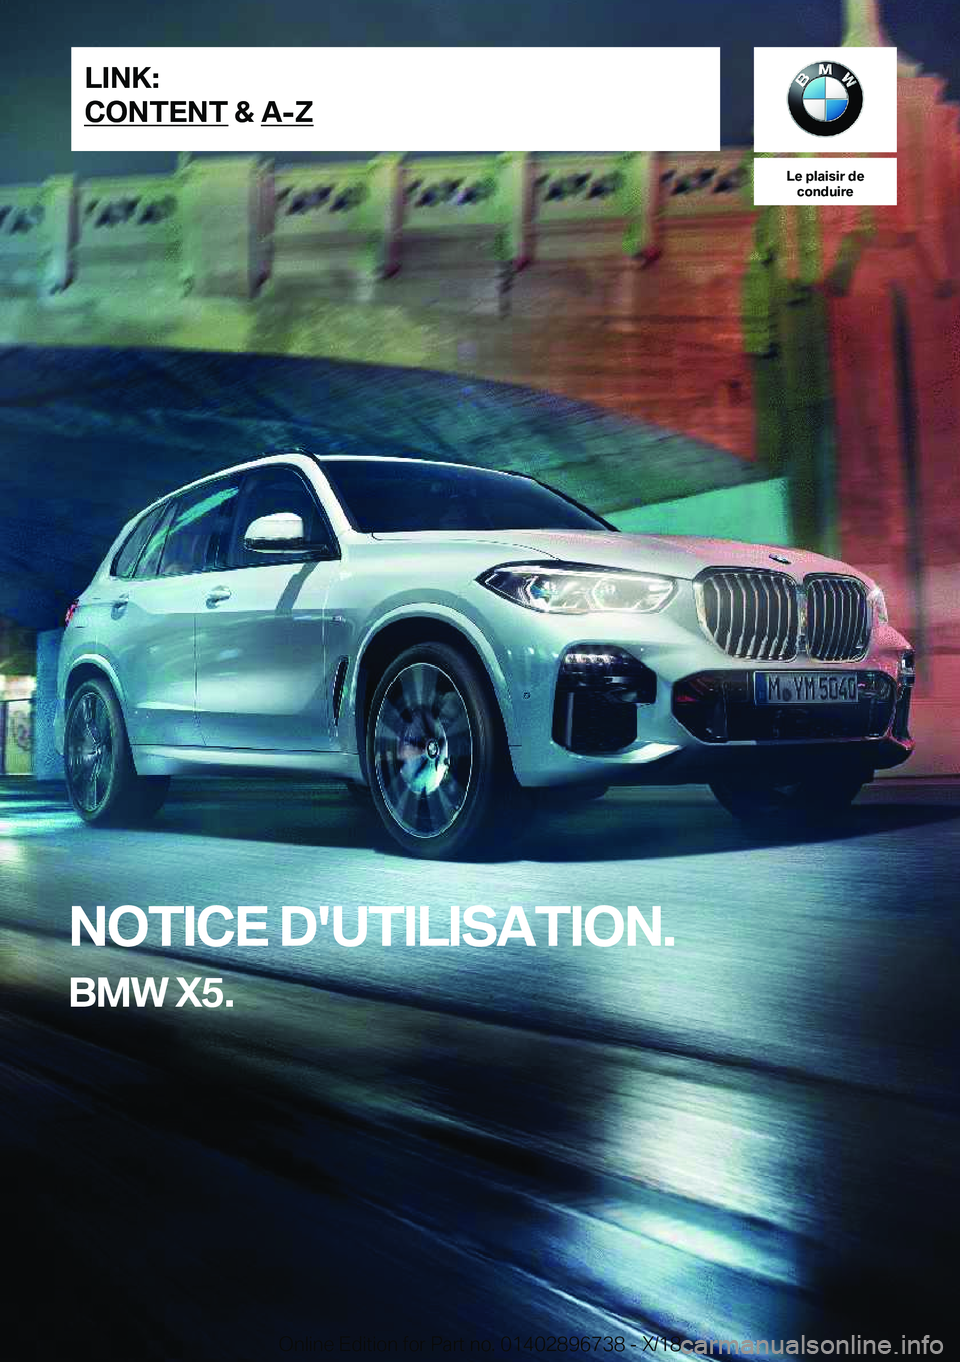 BMW X5 2019  Notices Demploi (in French) �L�e��p�l�a�i�s�i�r��d�e�c�o�n�d�u�i�r�e
�N�O�T�I�C�E��D�'�U�T�I�L�I�S�A�T�I�O�N�.
�B�M�W��X�5�.�L�I�N�K�:
�C�O�N�T�E�N�T��&��A�-�Z�O�n�l�i�n�e��E�d�i�t�i�o�n��f�o�r��P�a�r�t��n�o�.��0�